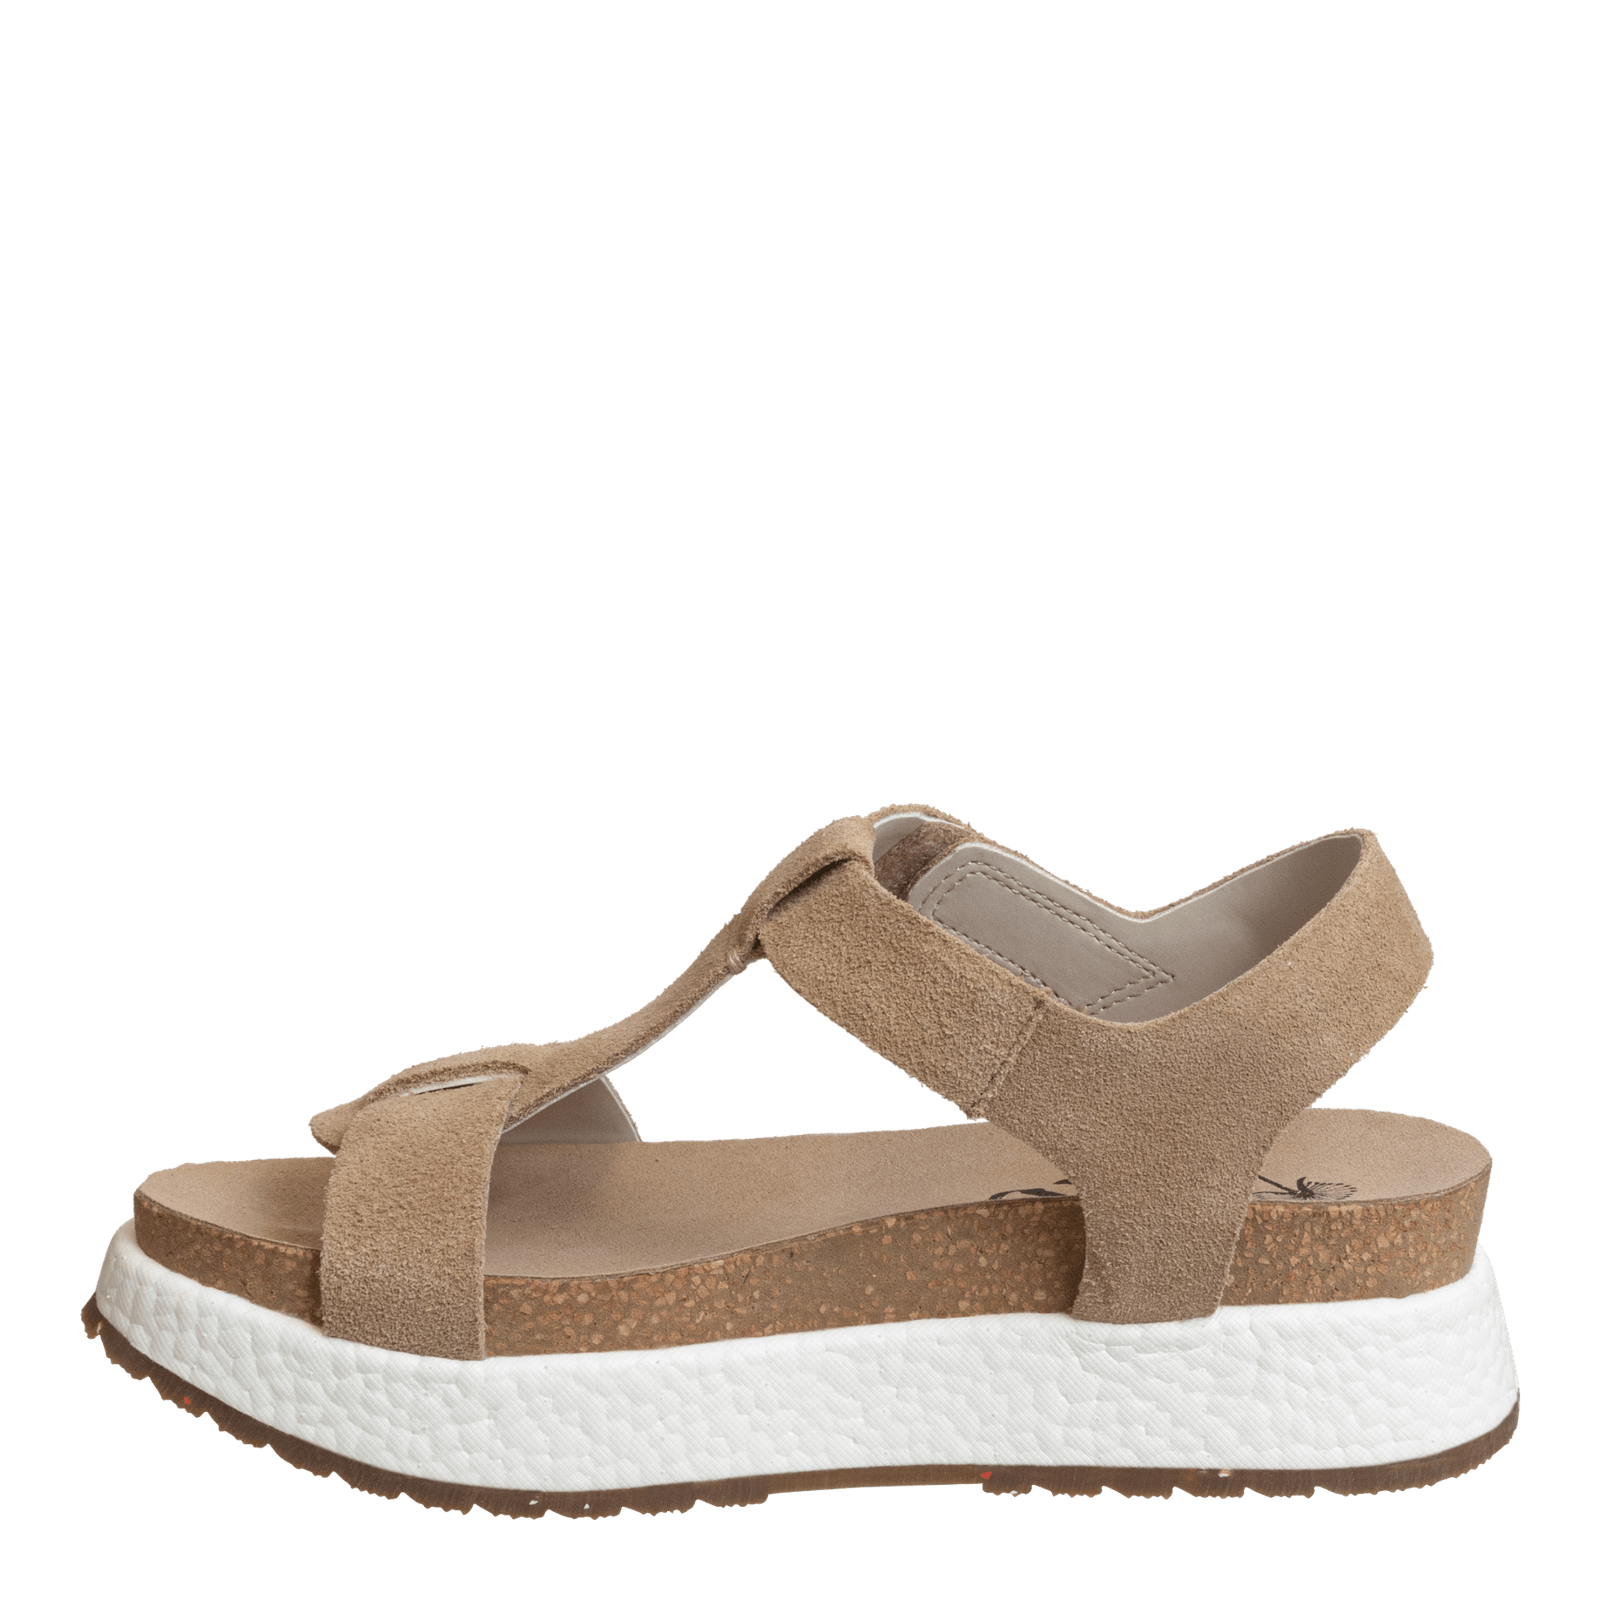 FLUENT in TAUPE Wedge Sandals - OTBT shoes